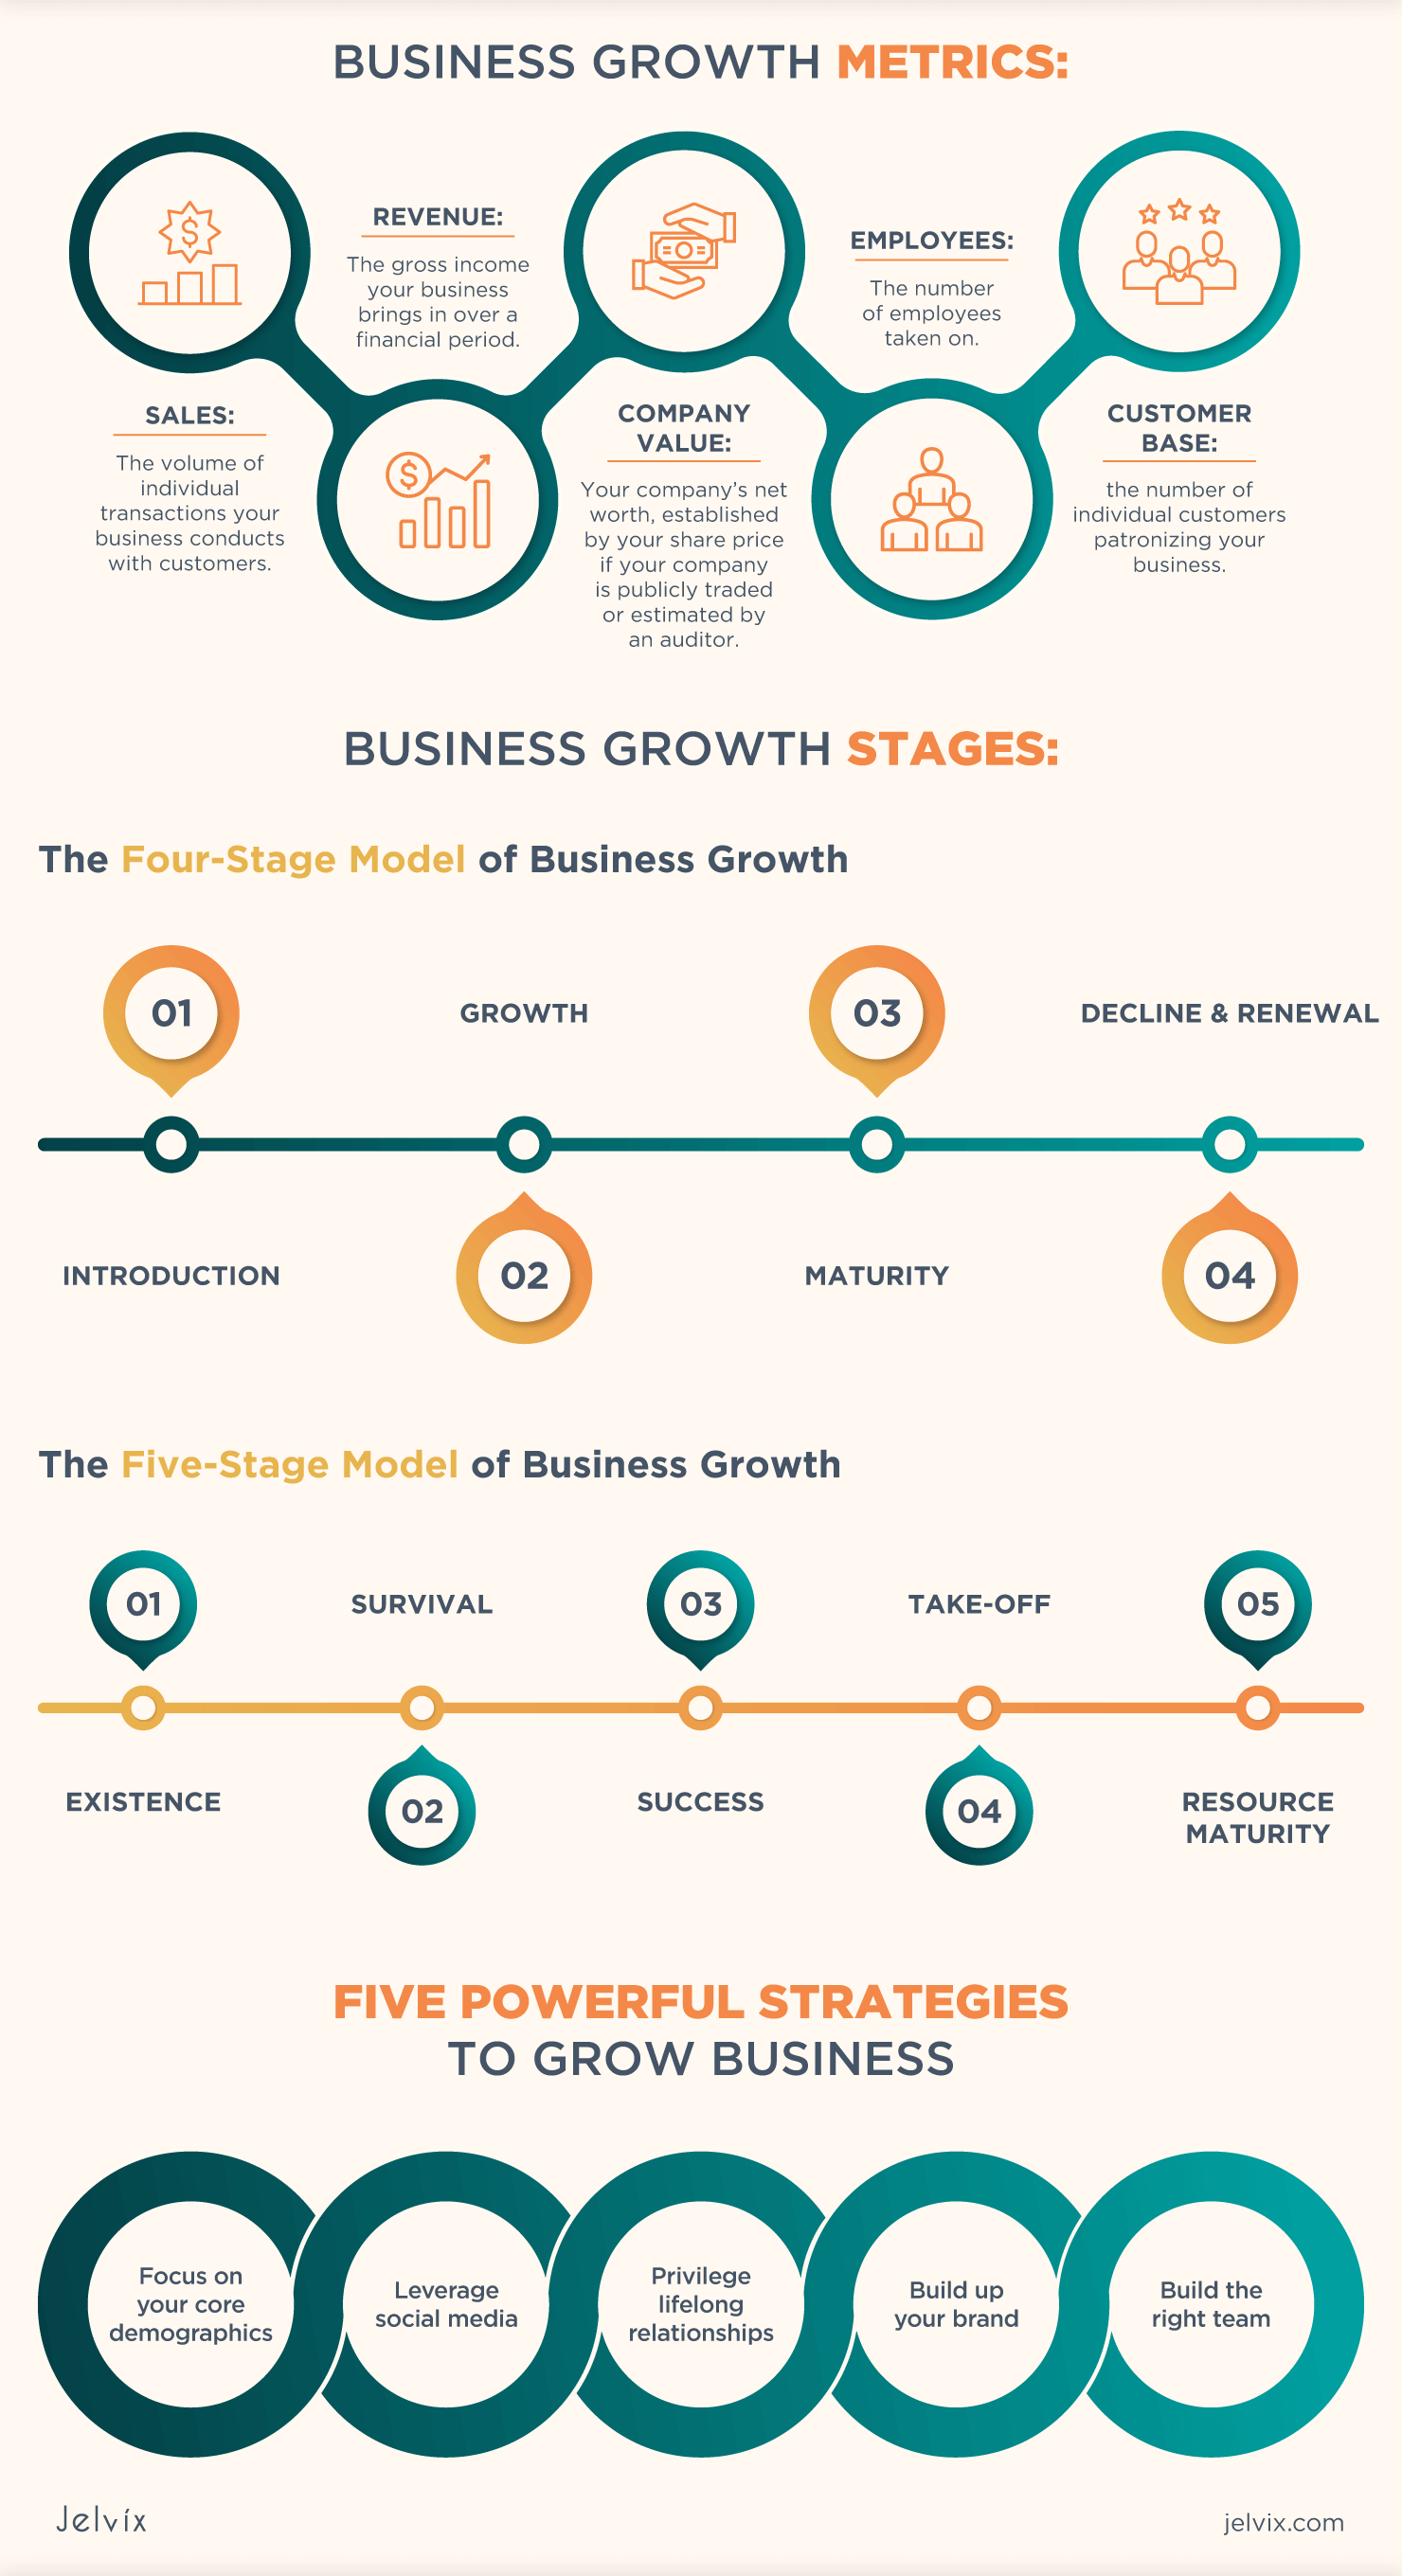 business plan how to grow